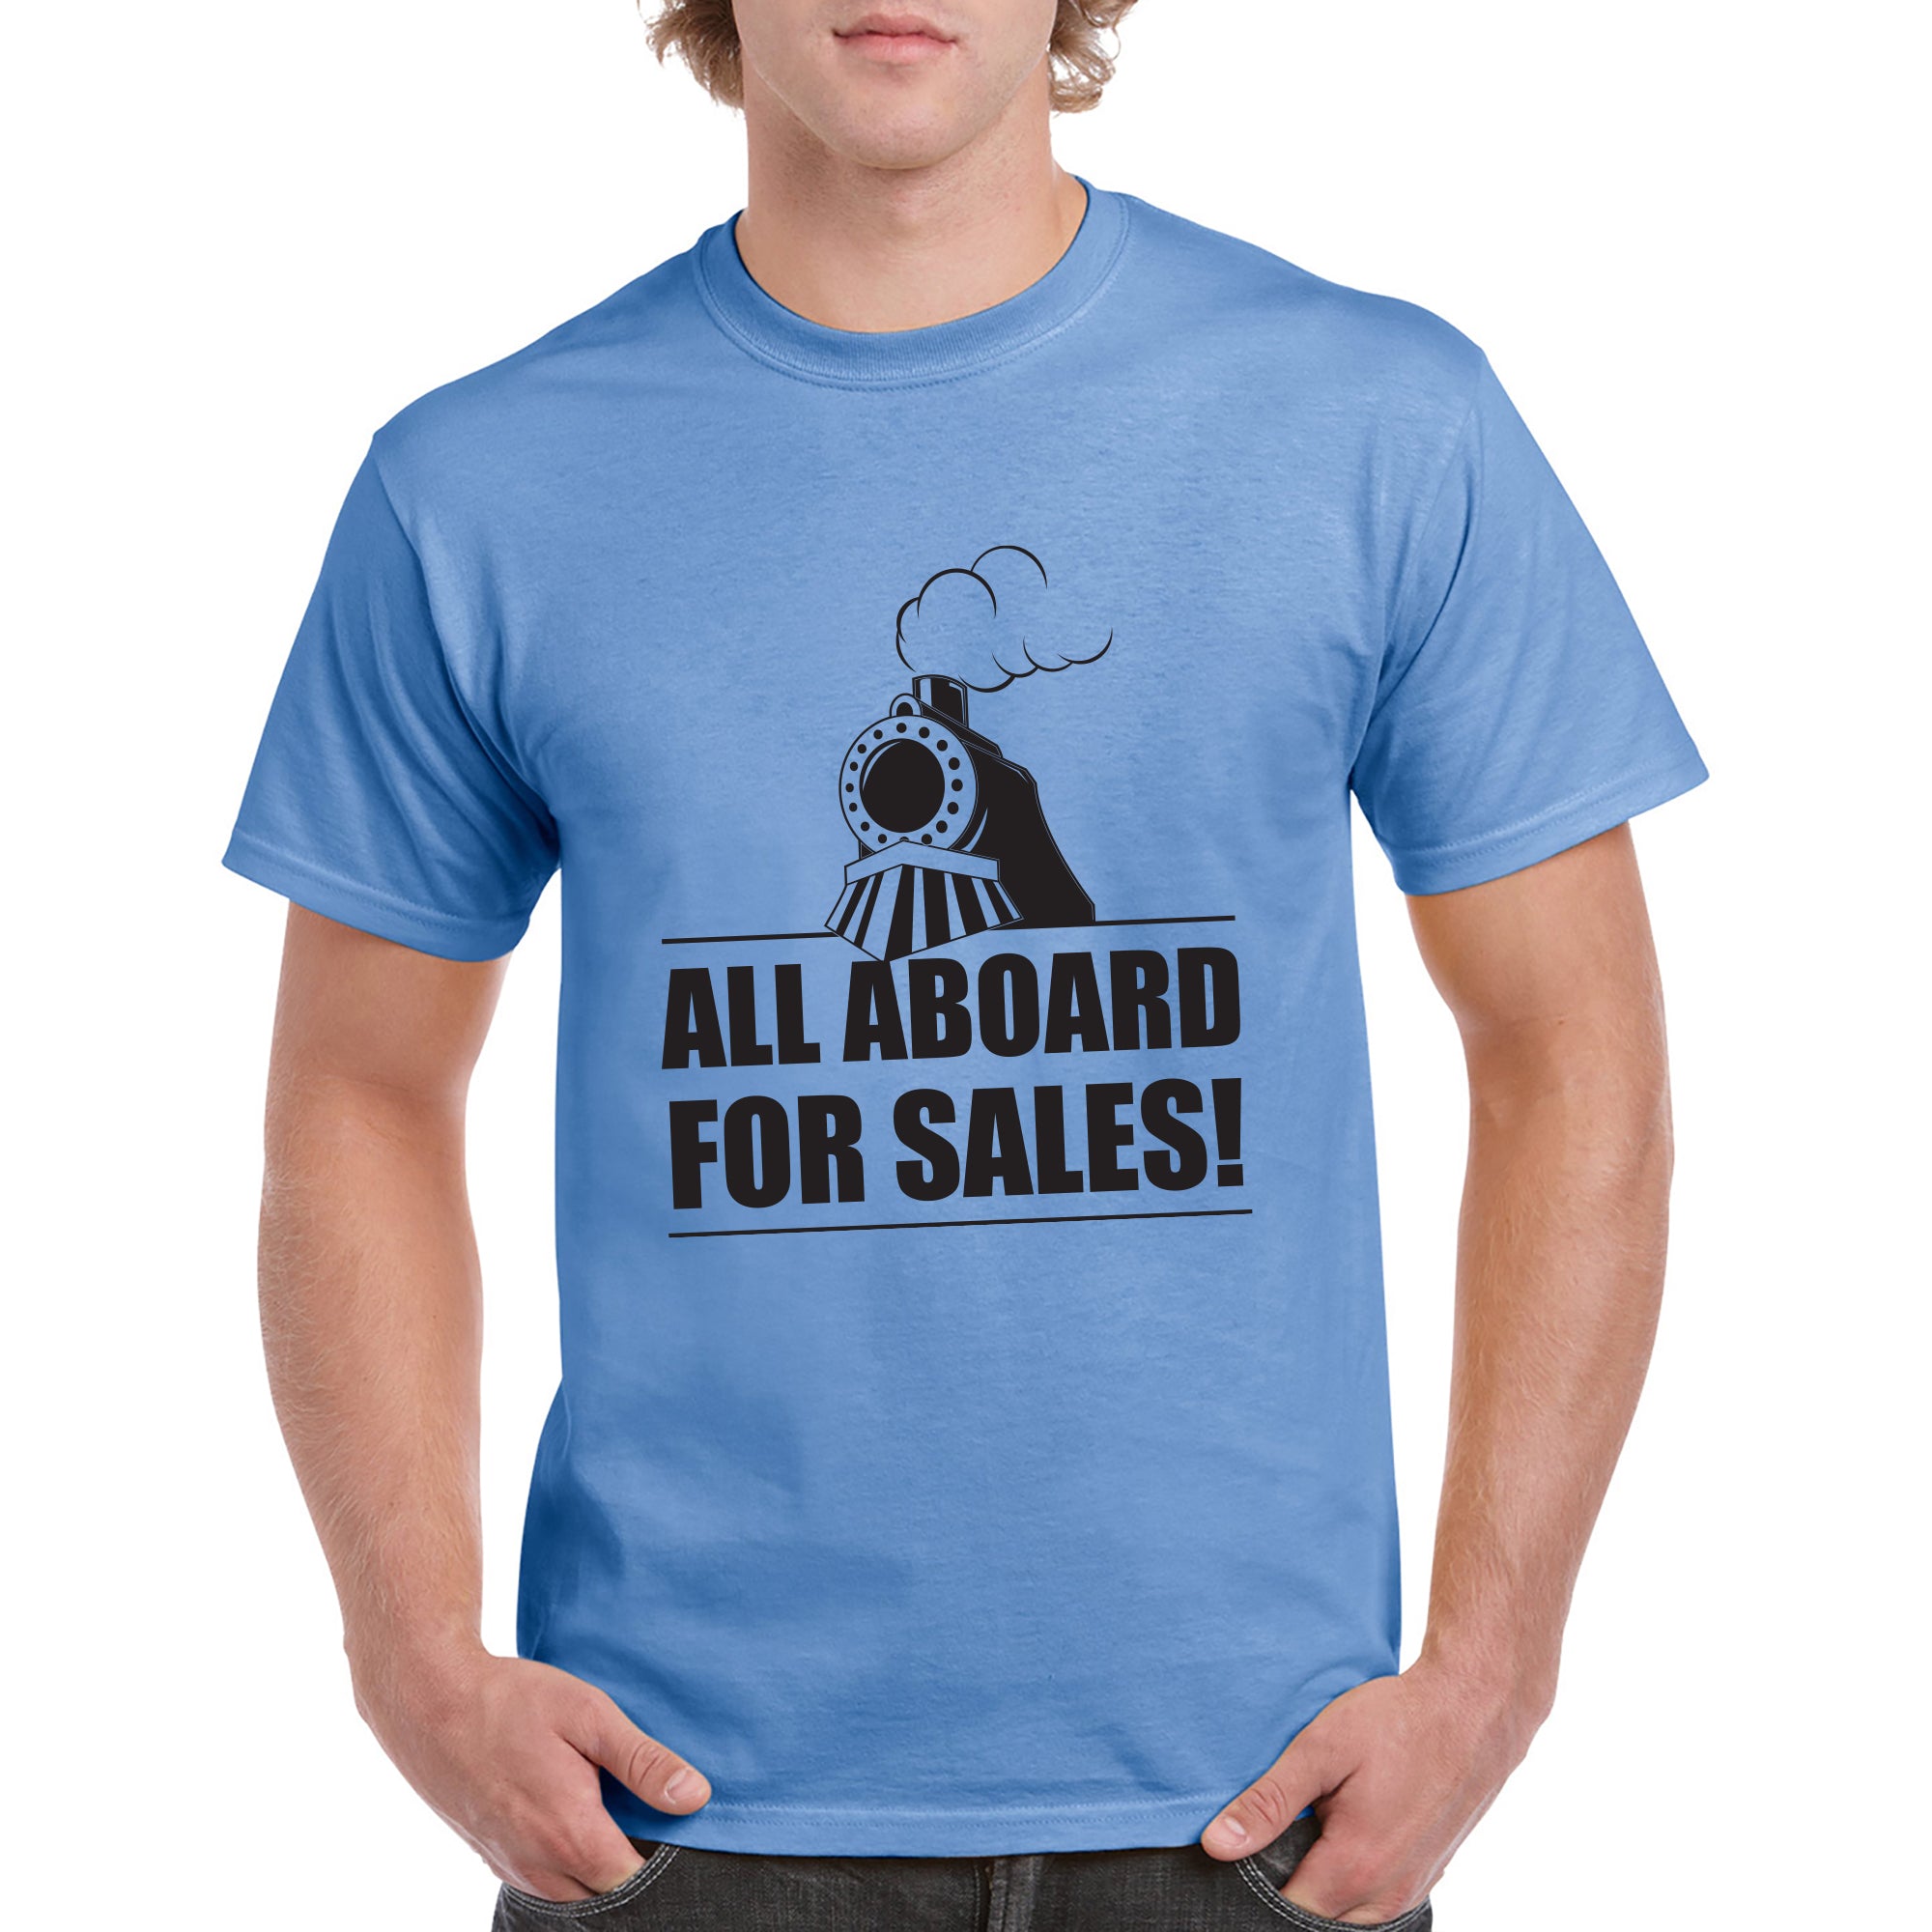 UGP Campus Apparel All Aboard for Sales - Funny Work TV Show Quote T S –  Underground Online Retail